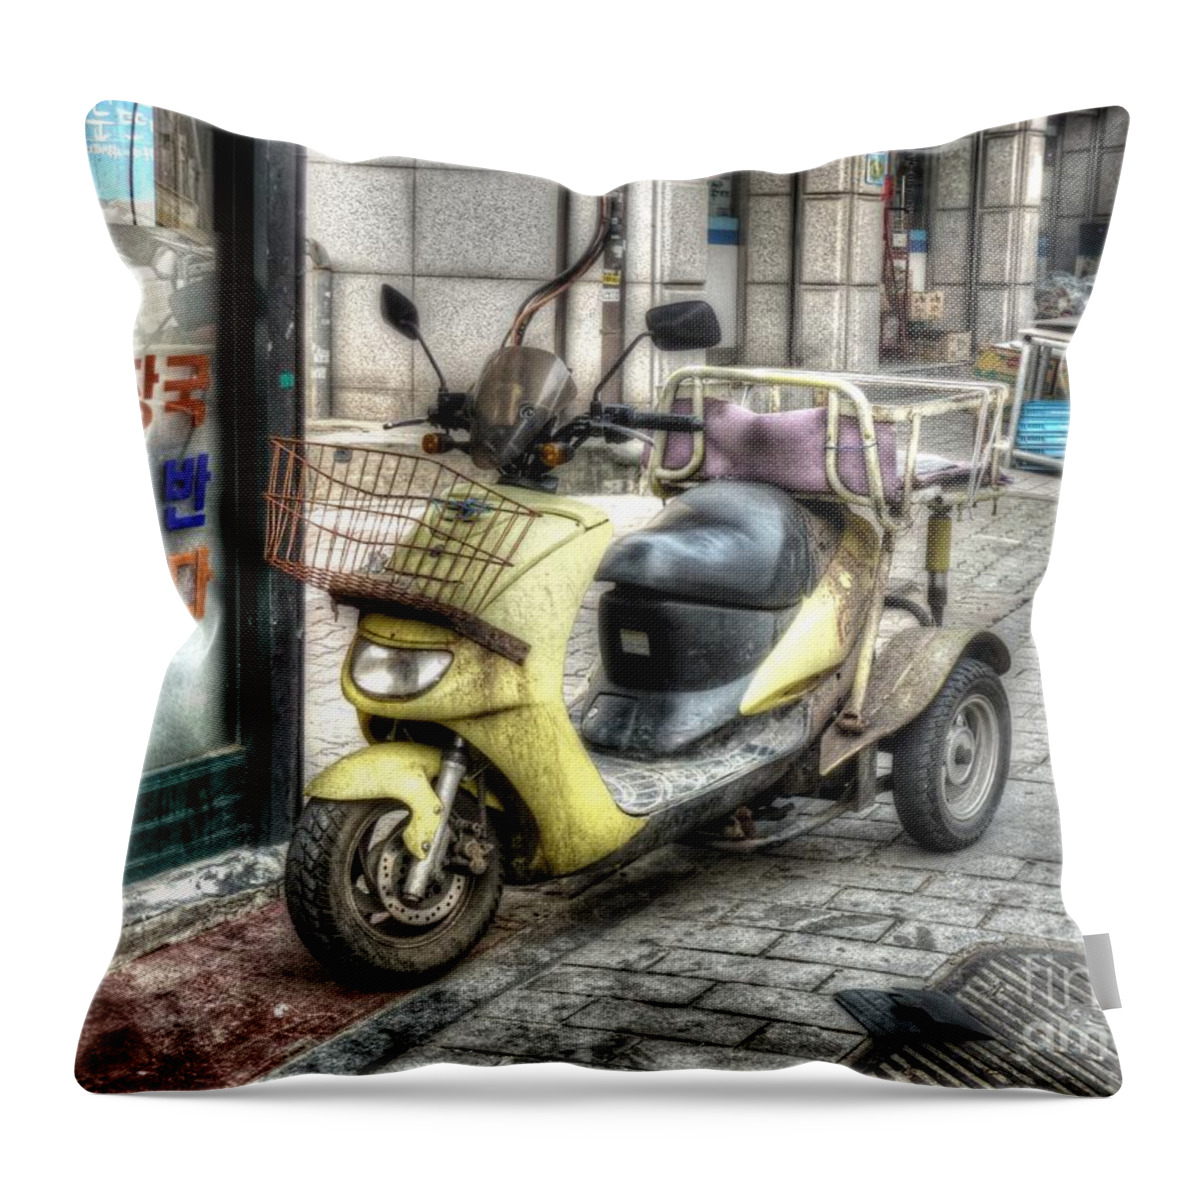 Retro Throw Pillow featuring the photograph Retro Moped by Michael Garyet